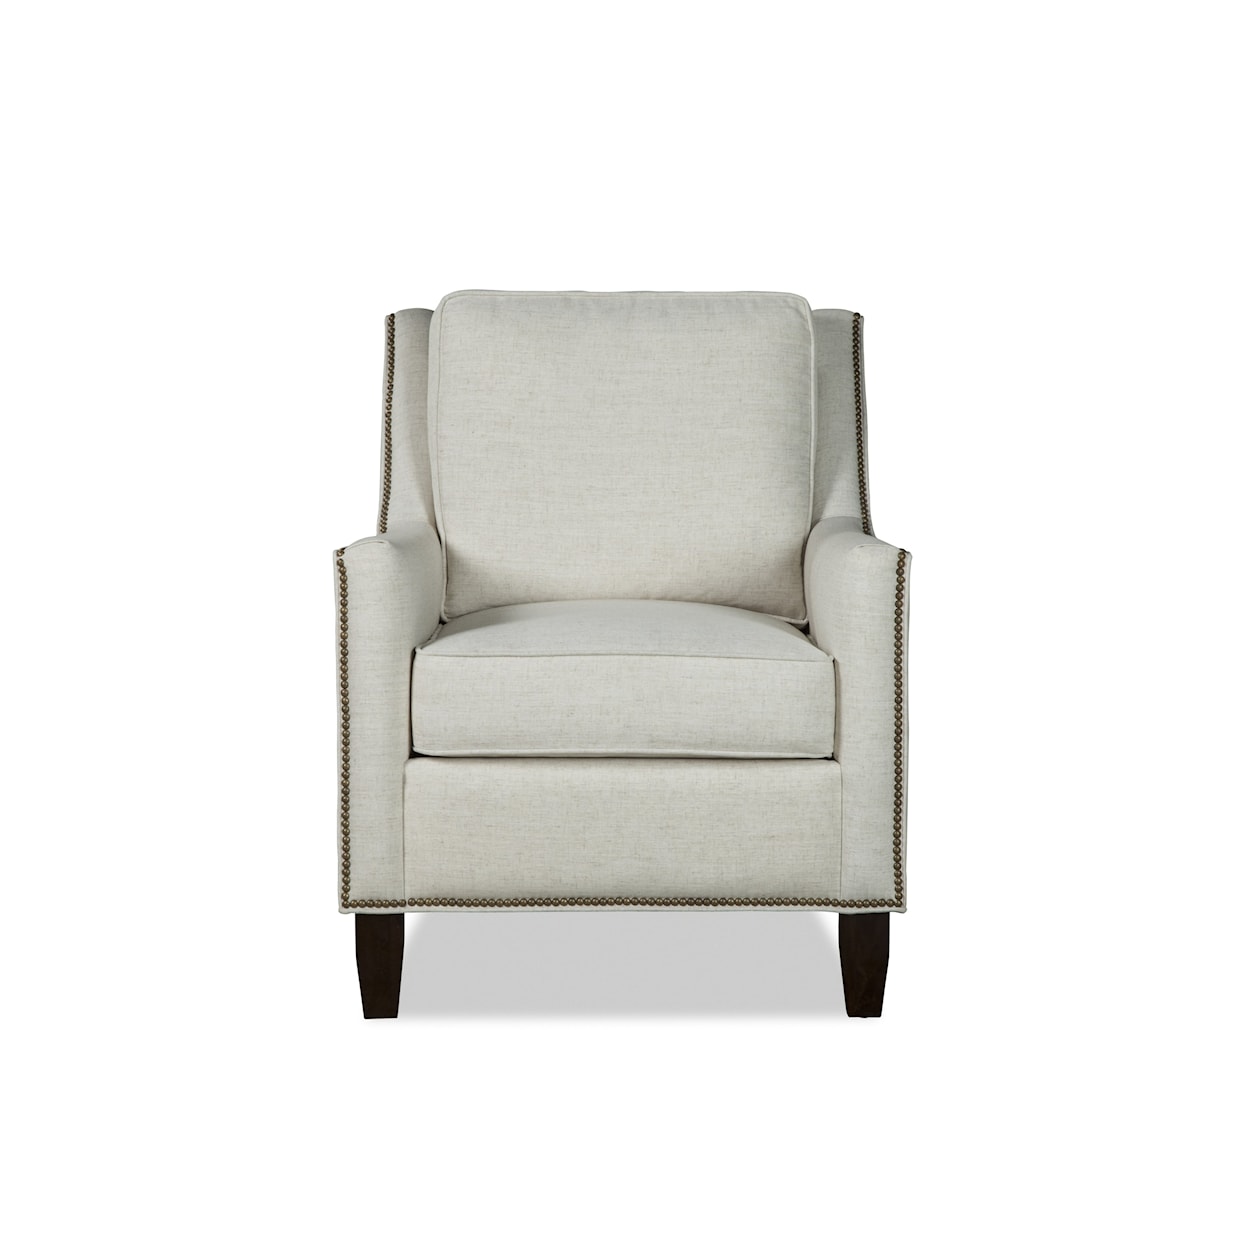 Hickory Craft Craftmaster Accent Chair